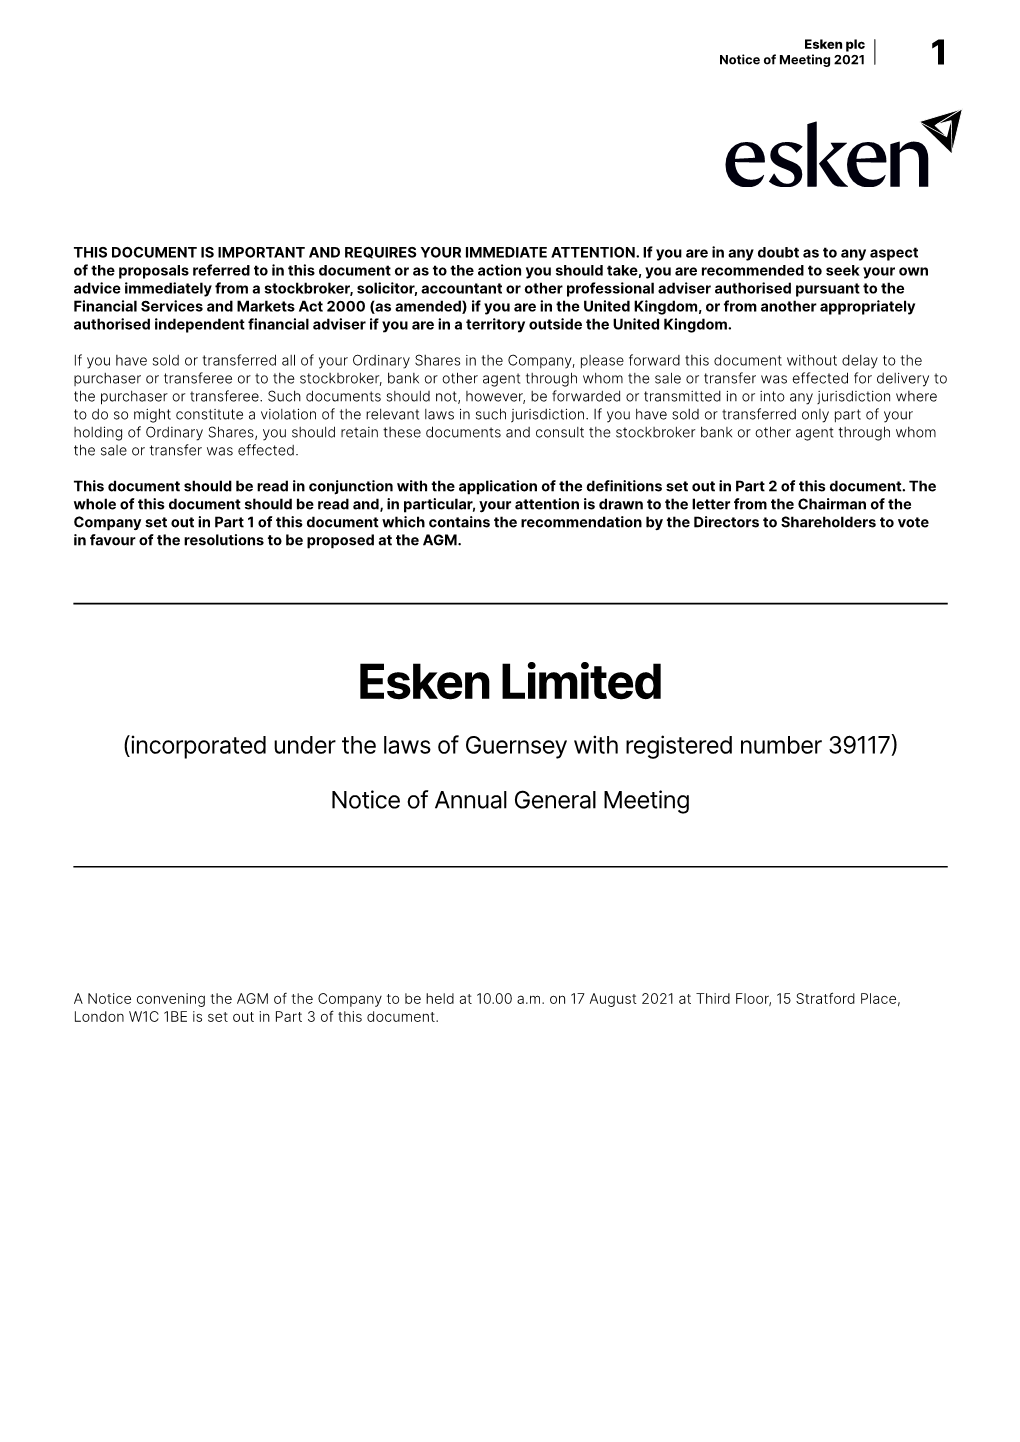 Esken Limited (Incorporated Under the Laws of Guernsey with Registered Number 39117)